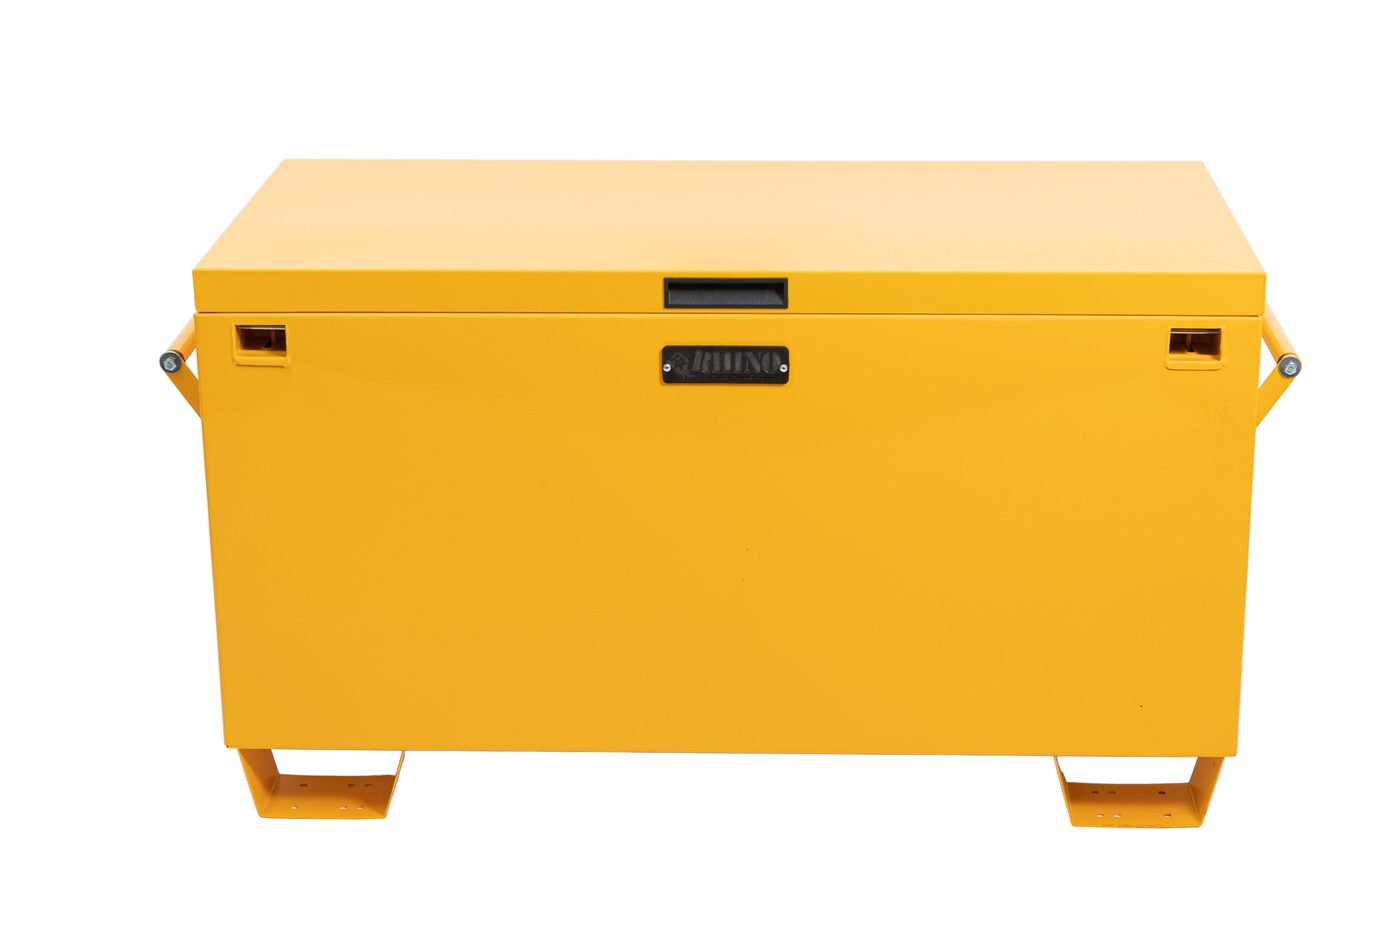 Medium Yellow Powder Coated Site Box with Theft Protect Lock Box Front View